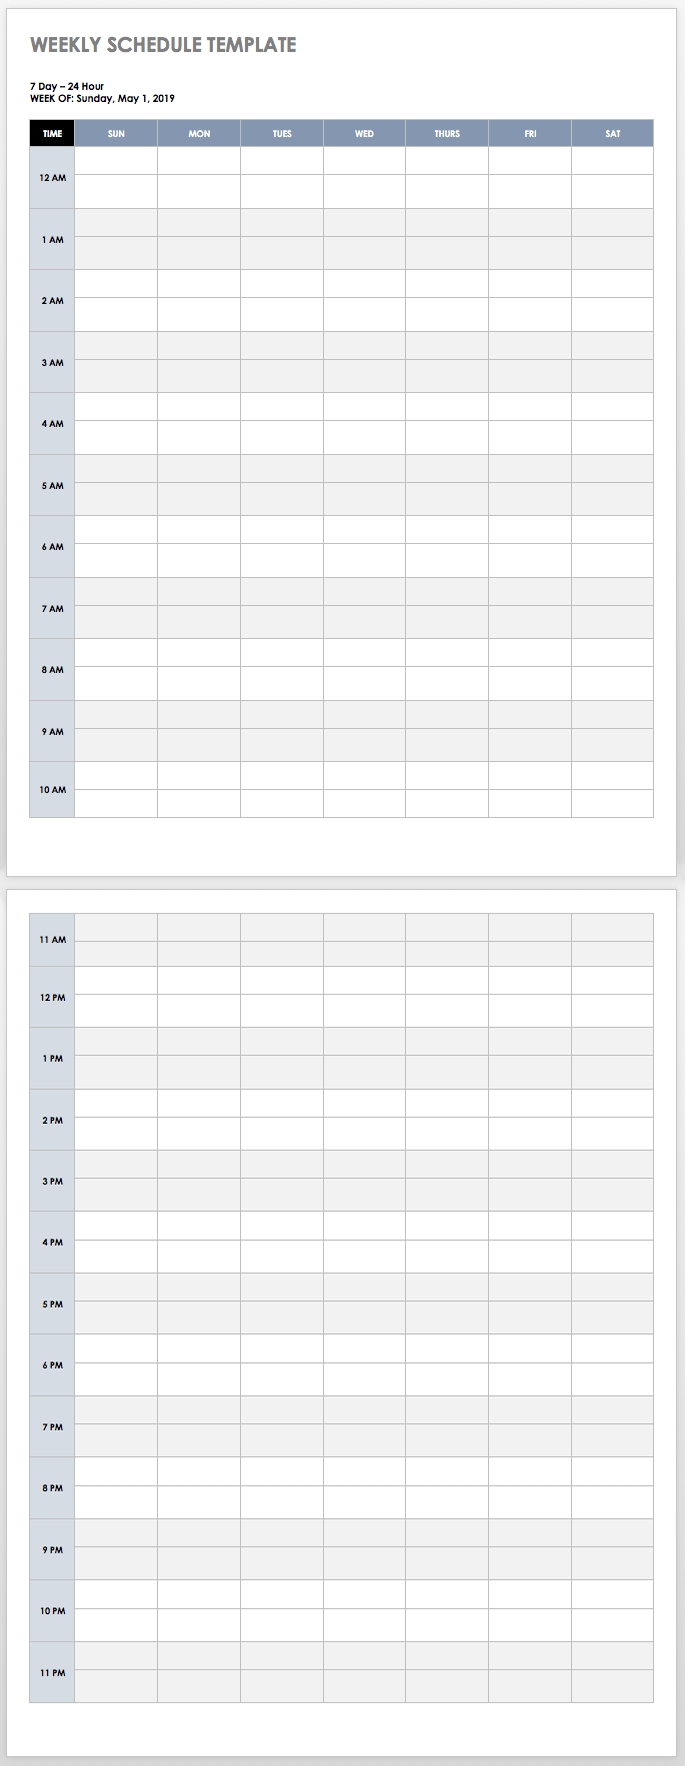 28 Free Time Management Worksheets | Smartsheet within Week Schedule Template With Times